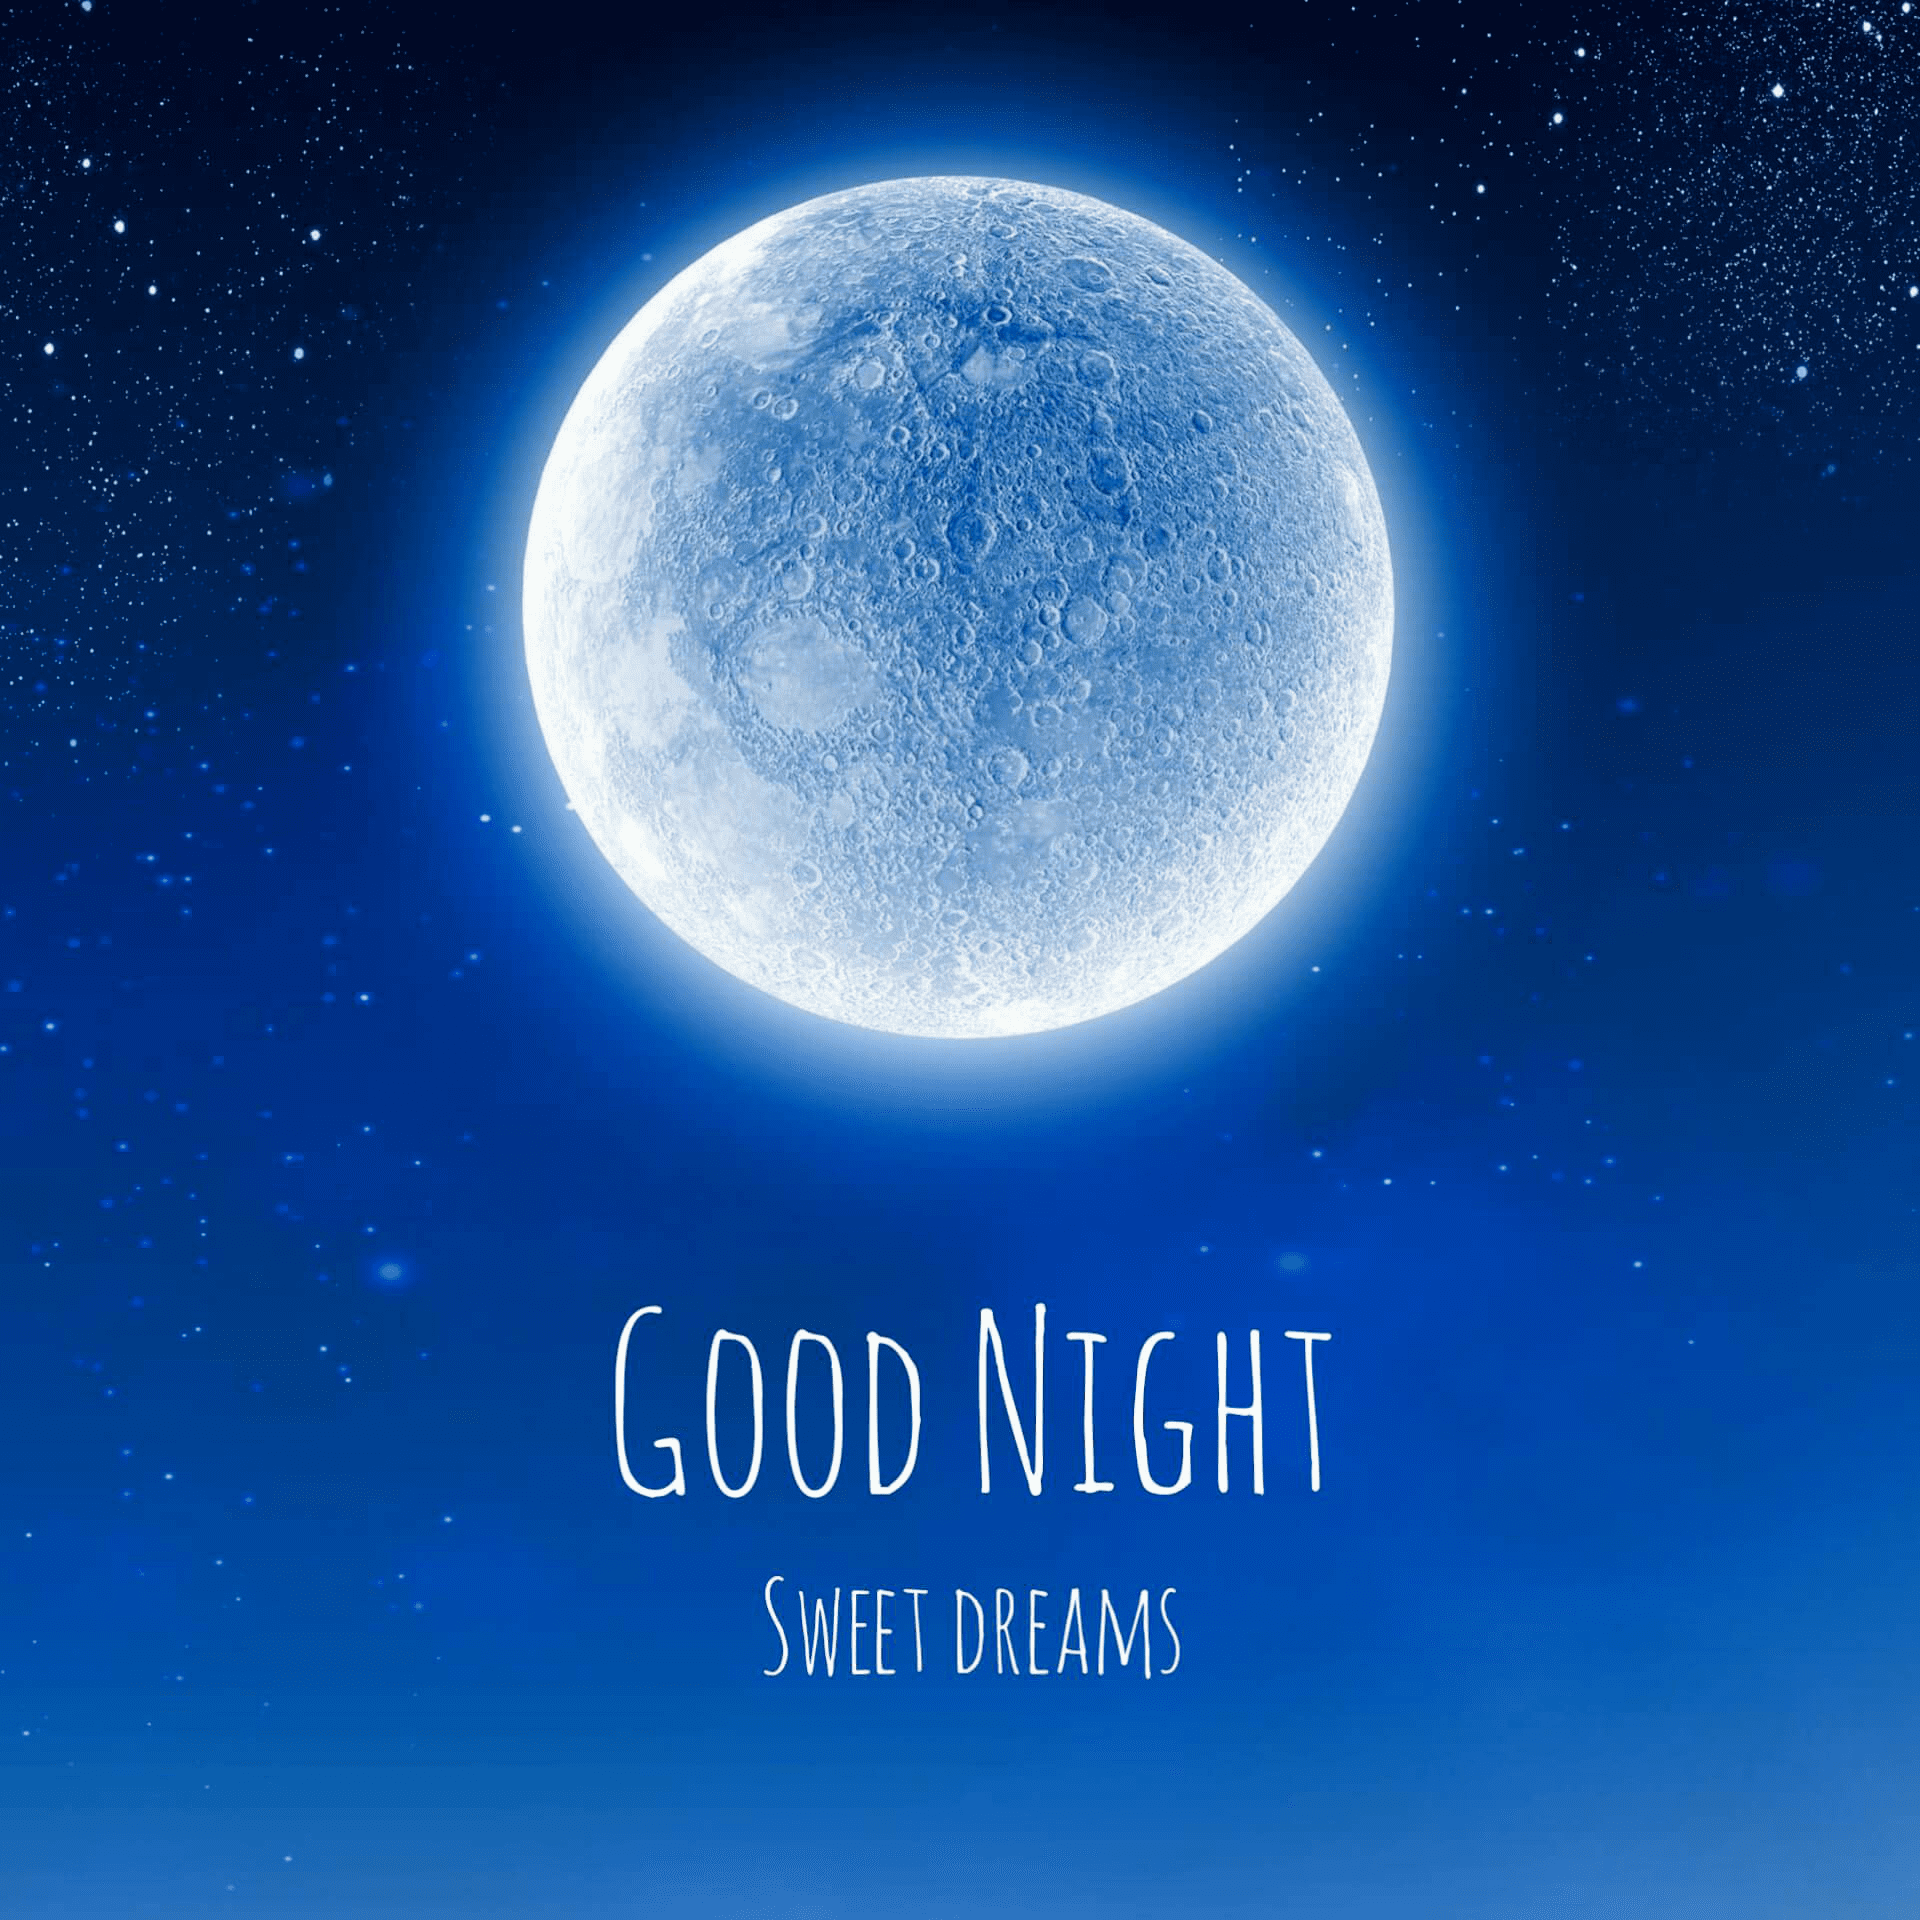 86+ Good Night Messages – Wishes, Messages, Images, and Quotes